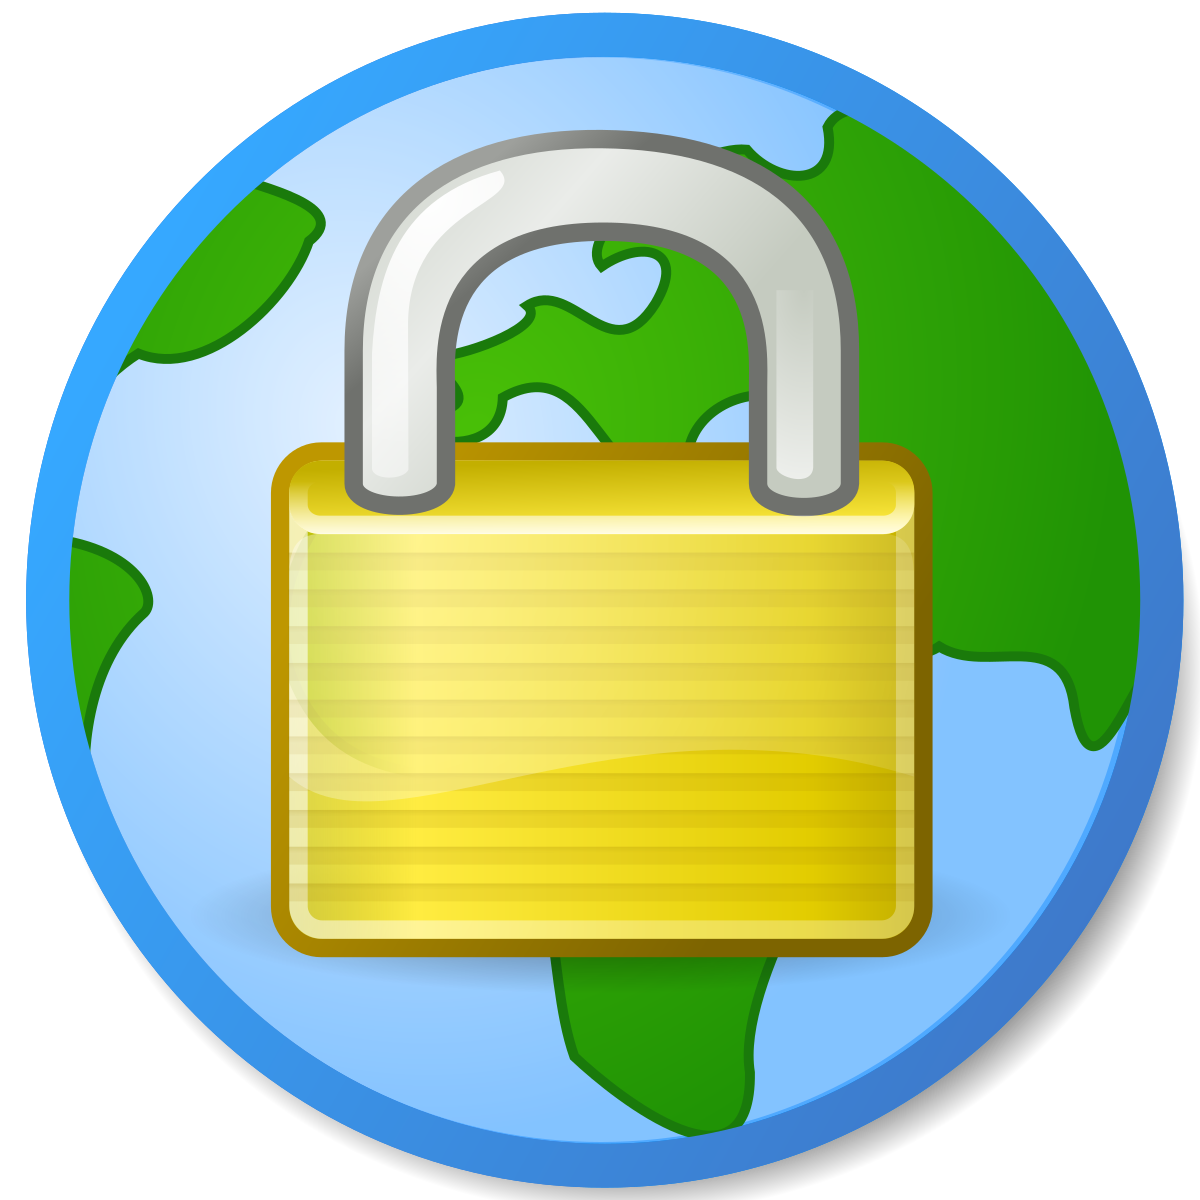 File:Globally locked.svg - Wikimedia Commons